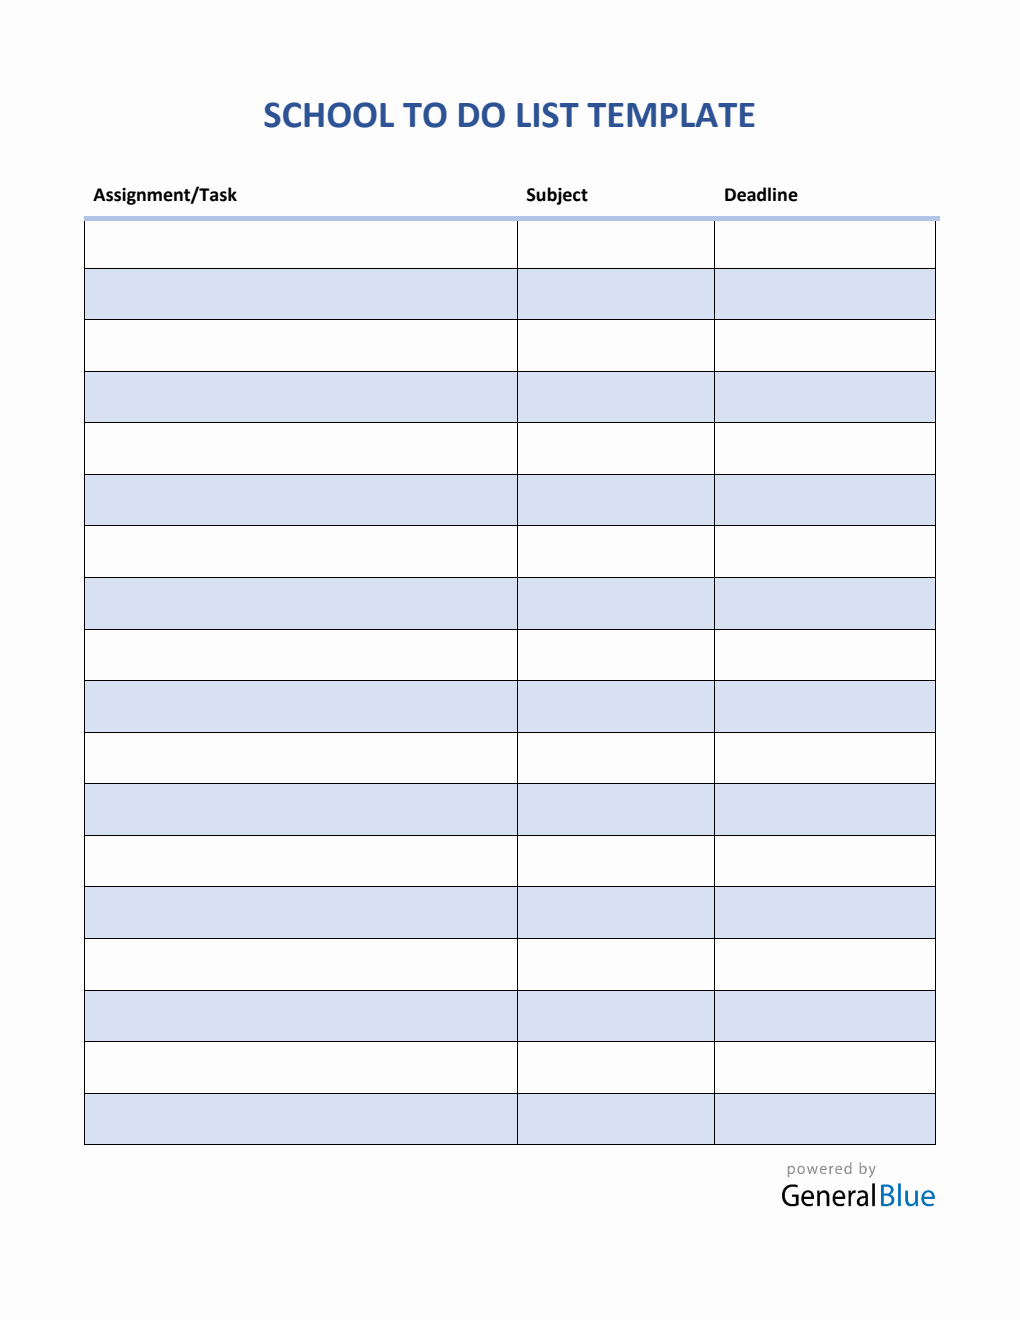 School To-Do List Template in Word